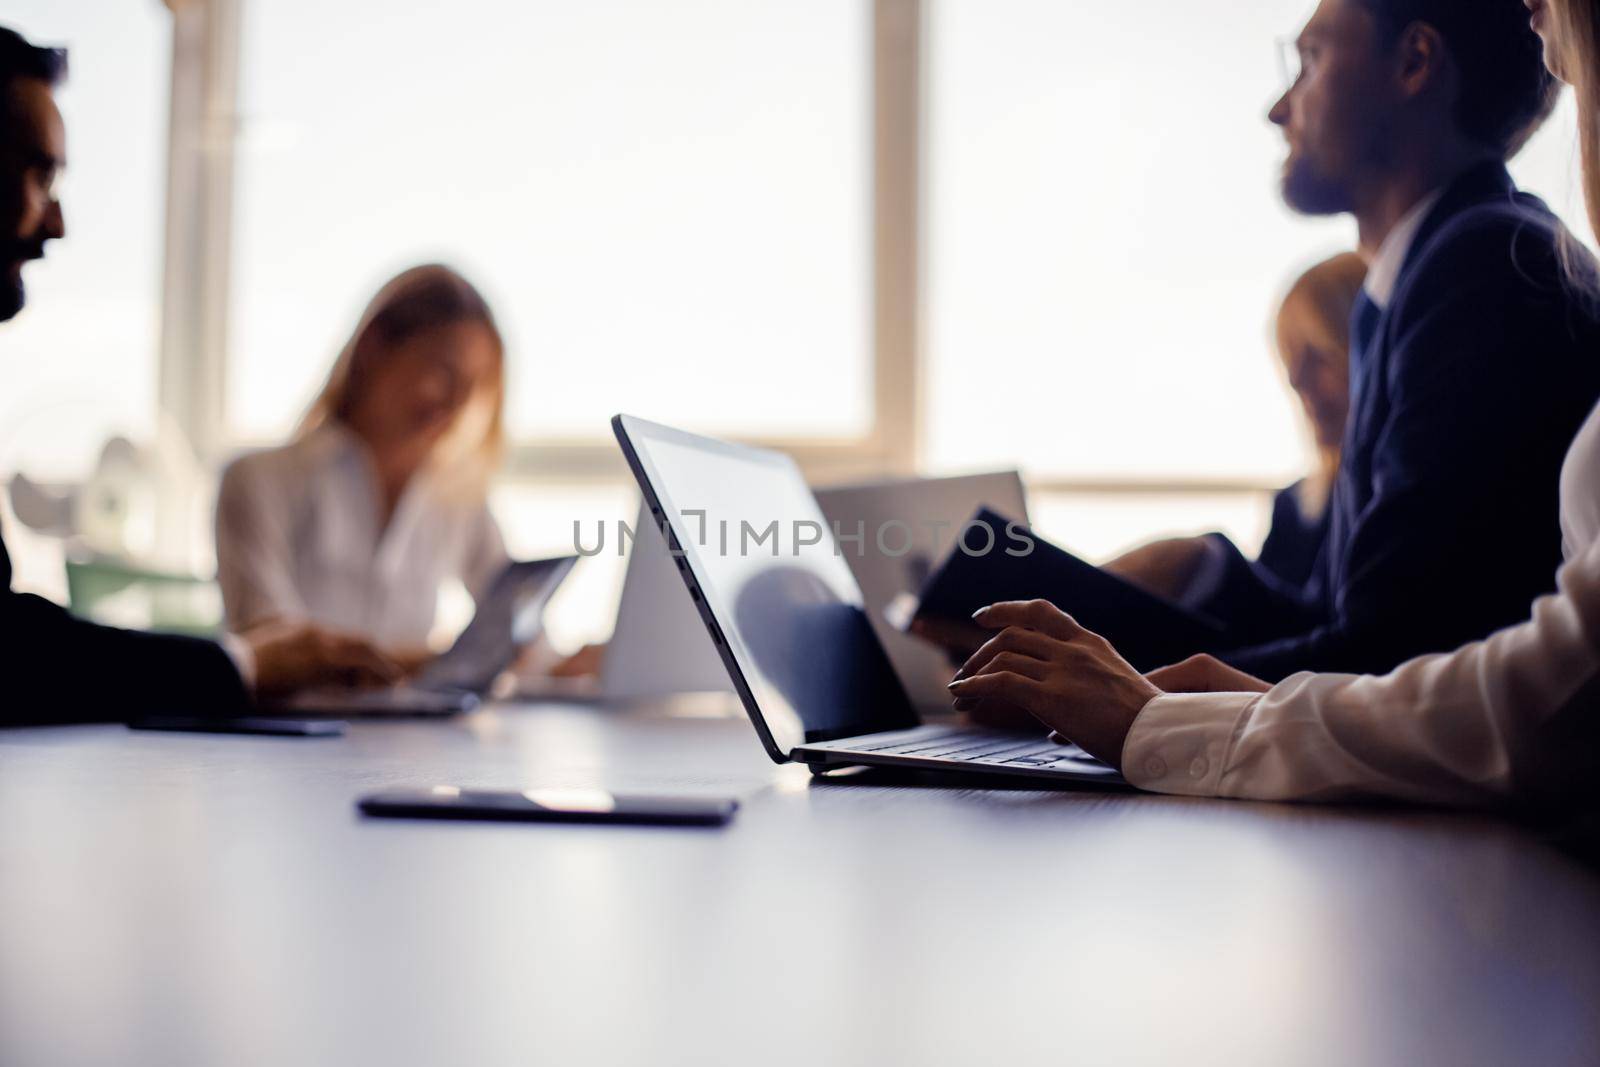 Group of business people working with laptop computers in office against of windows on blurred background. Selective focus on female hands typing in foreground. Toned image.